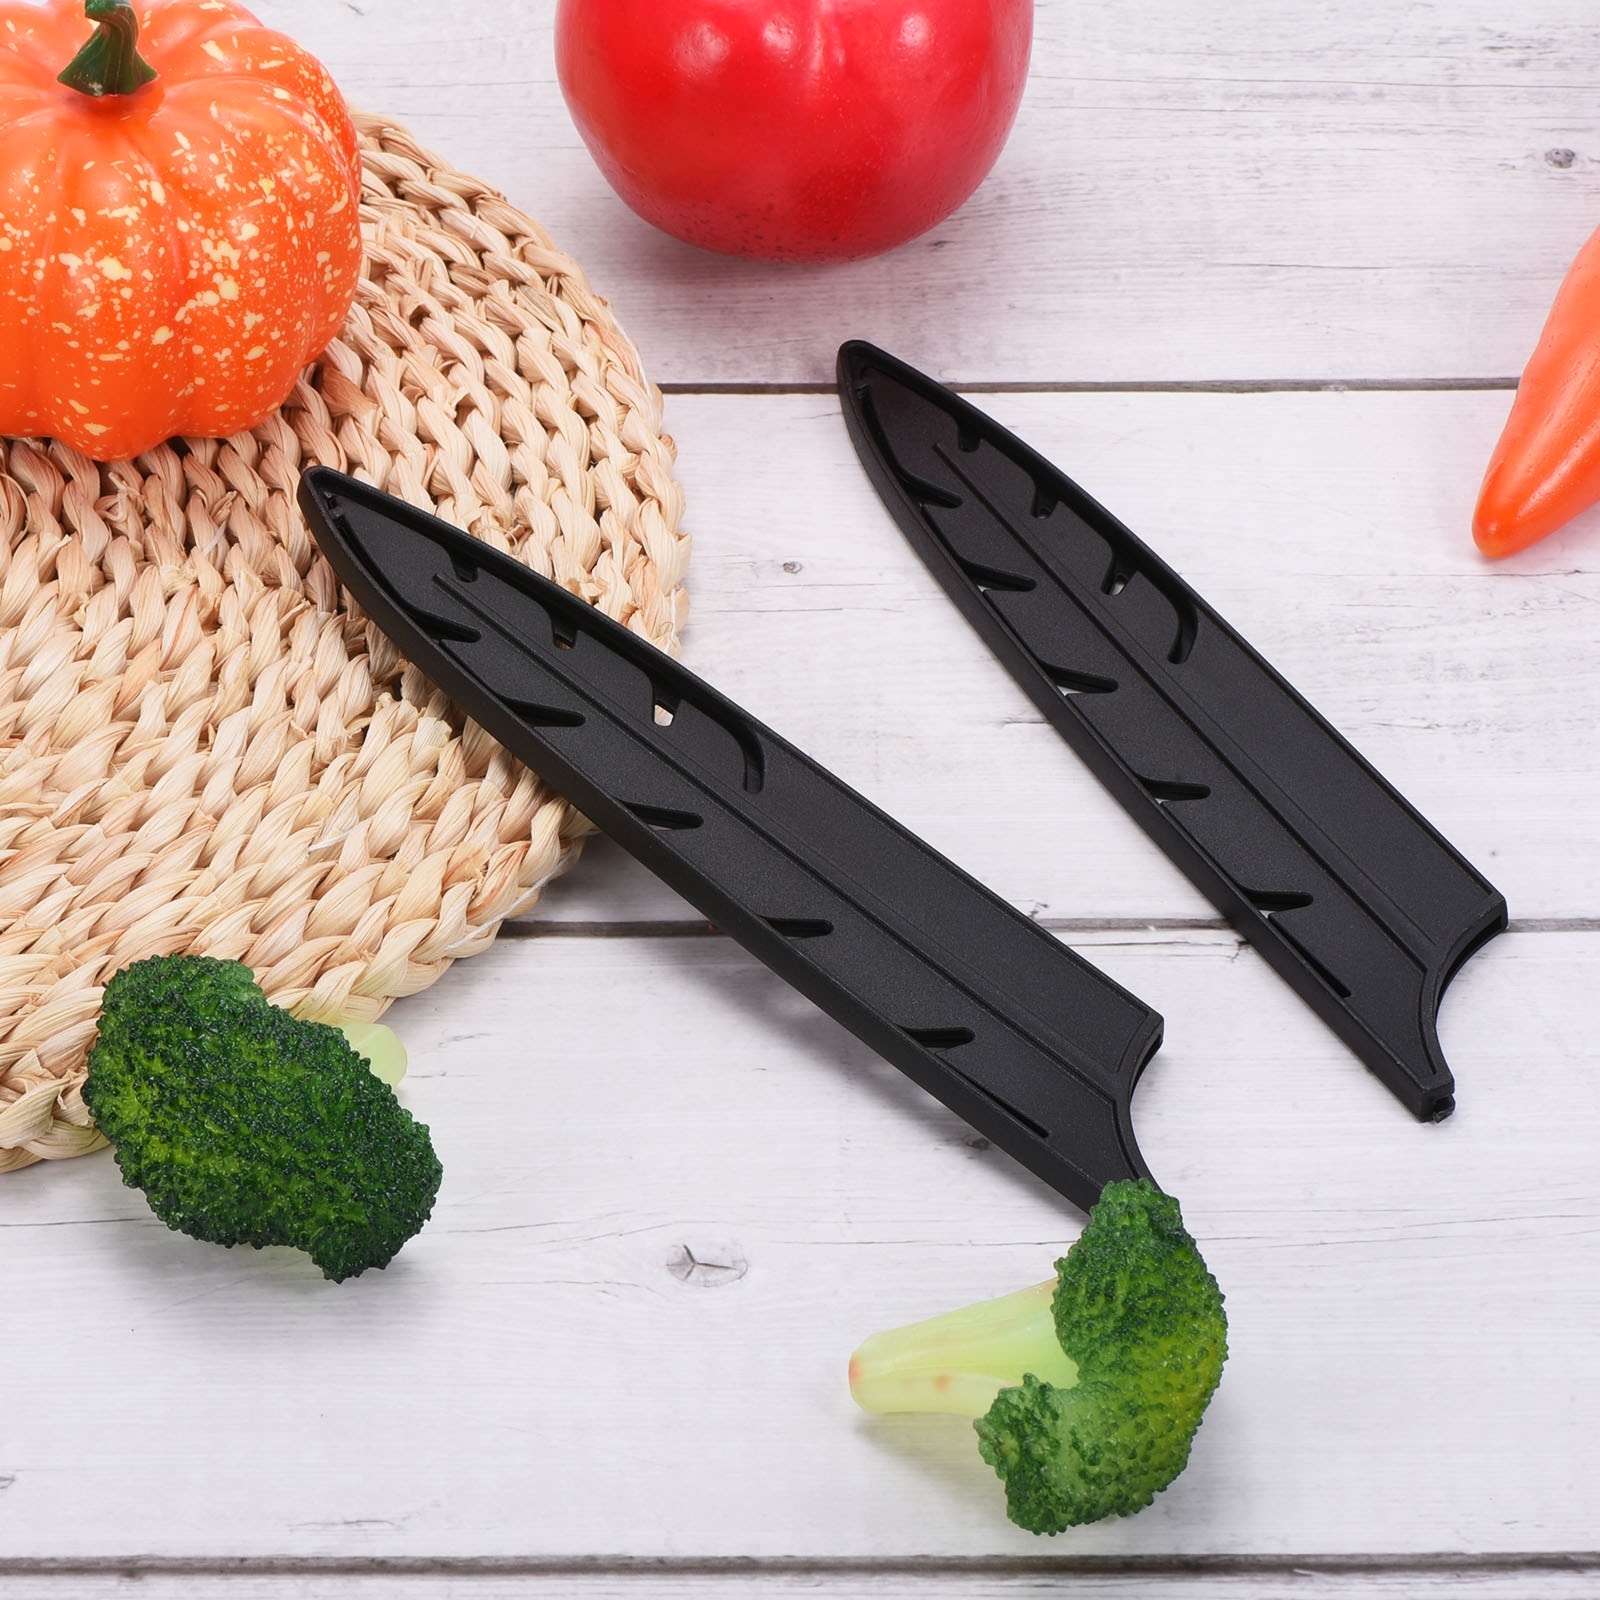 Plastic Kitchen Knife Sheath Cover Sleeves for 8 Carving Knife - Black -  On Sale - Bed Bath & Beyond - 37922103